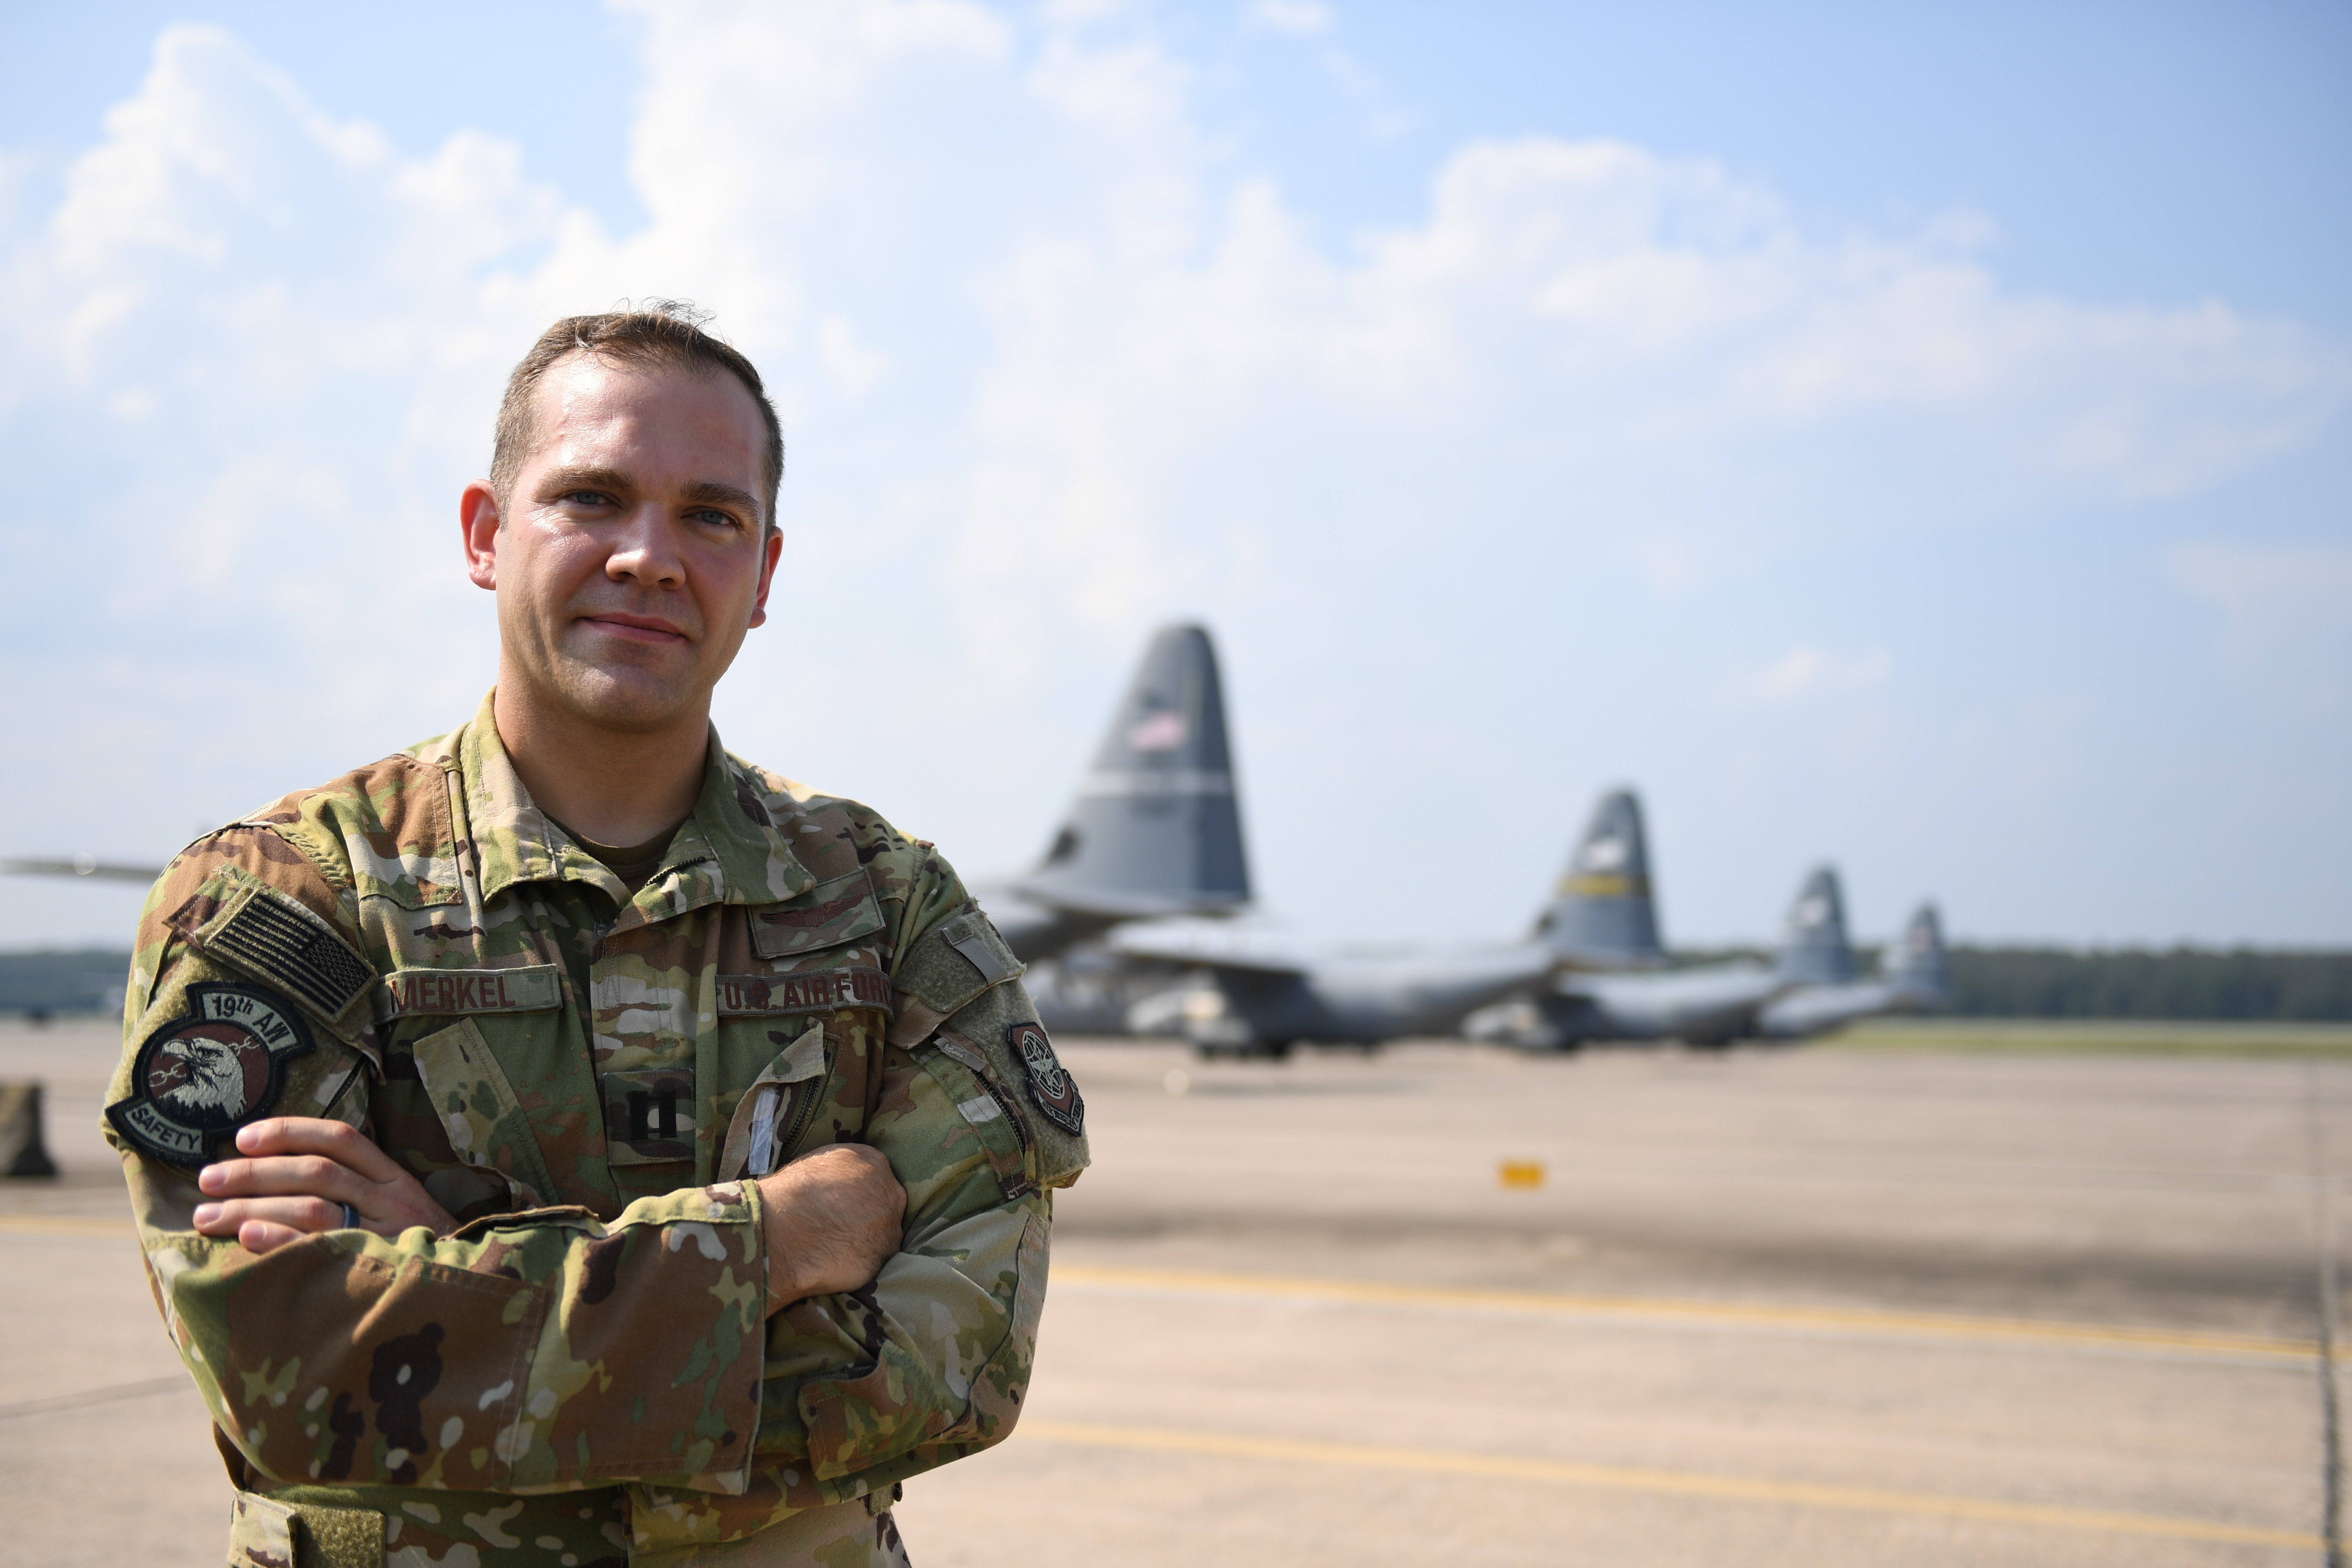 An Air Force officer standing on a flight line with aircraft parked behind him.